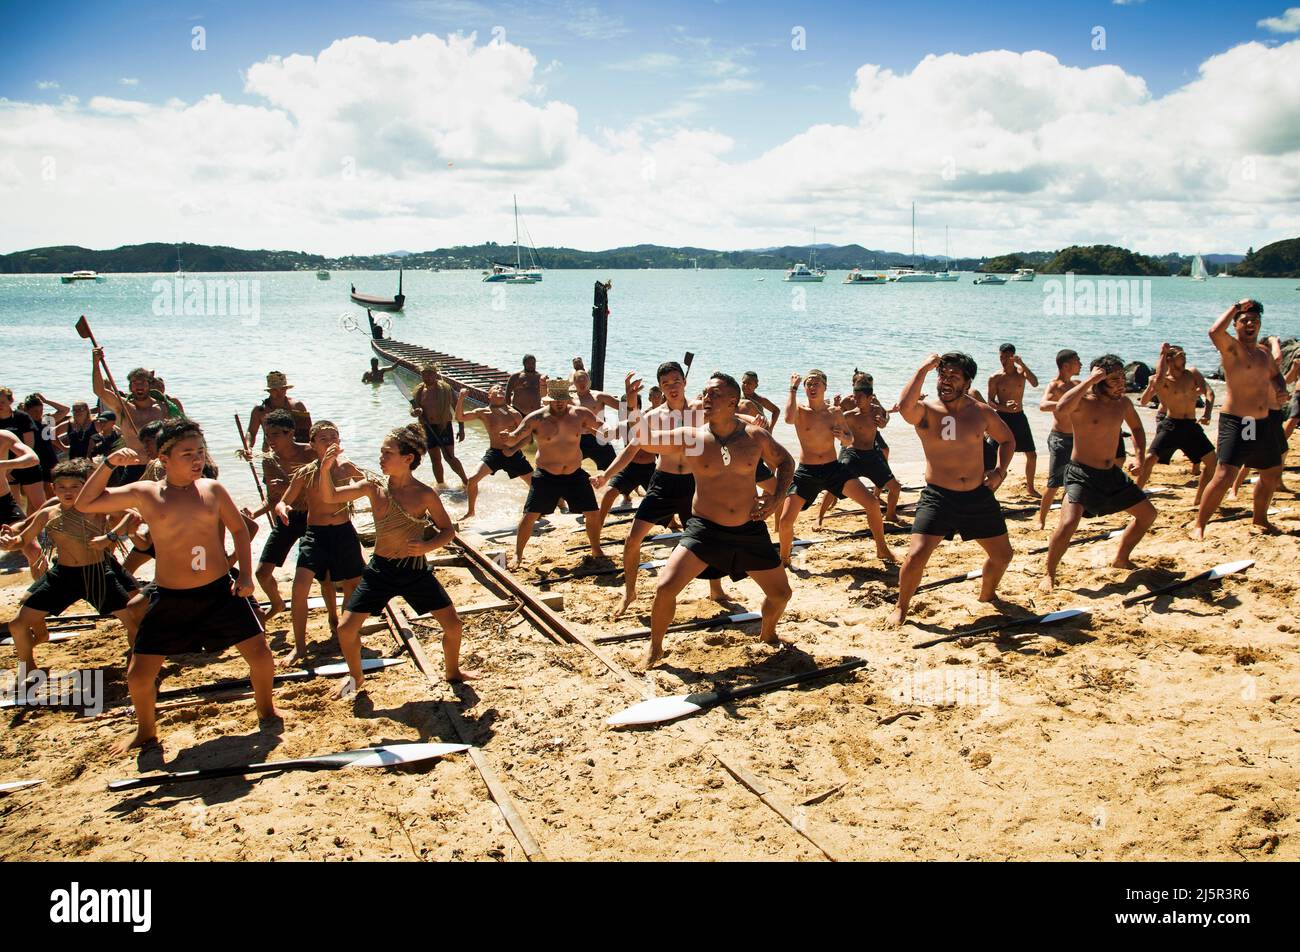 The haka is a traditional war cry, war dance, or challenge in Māori culture. On the photo it is performed during Waitingi day. Waitangi Day is the nat Stock Photo